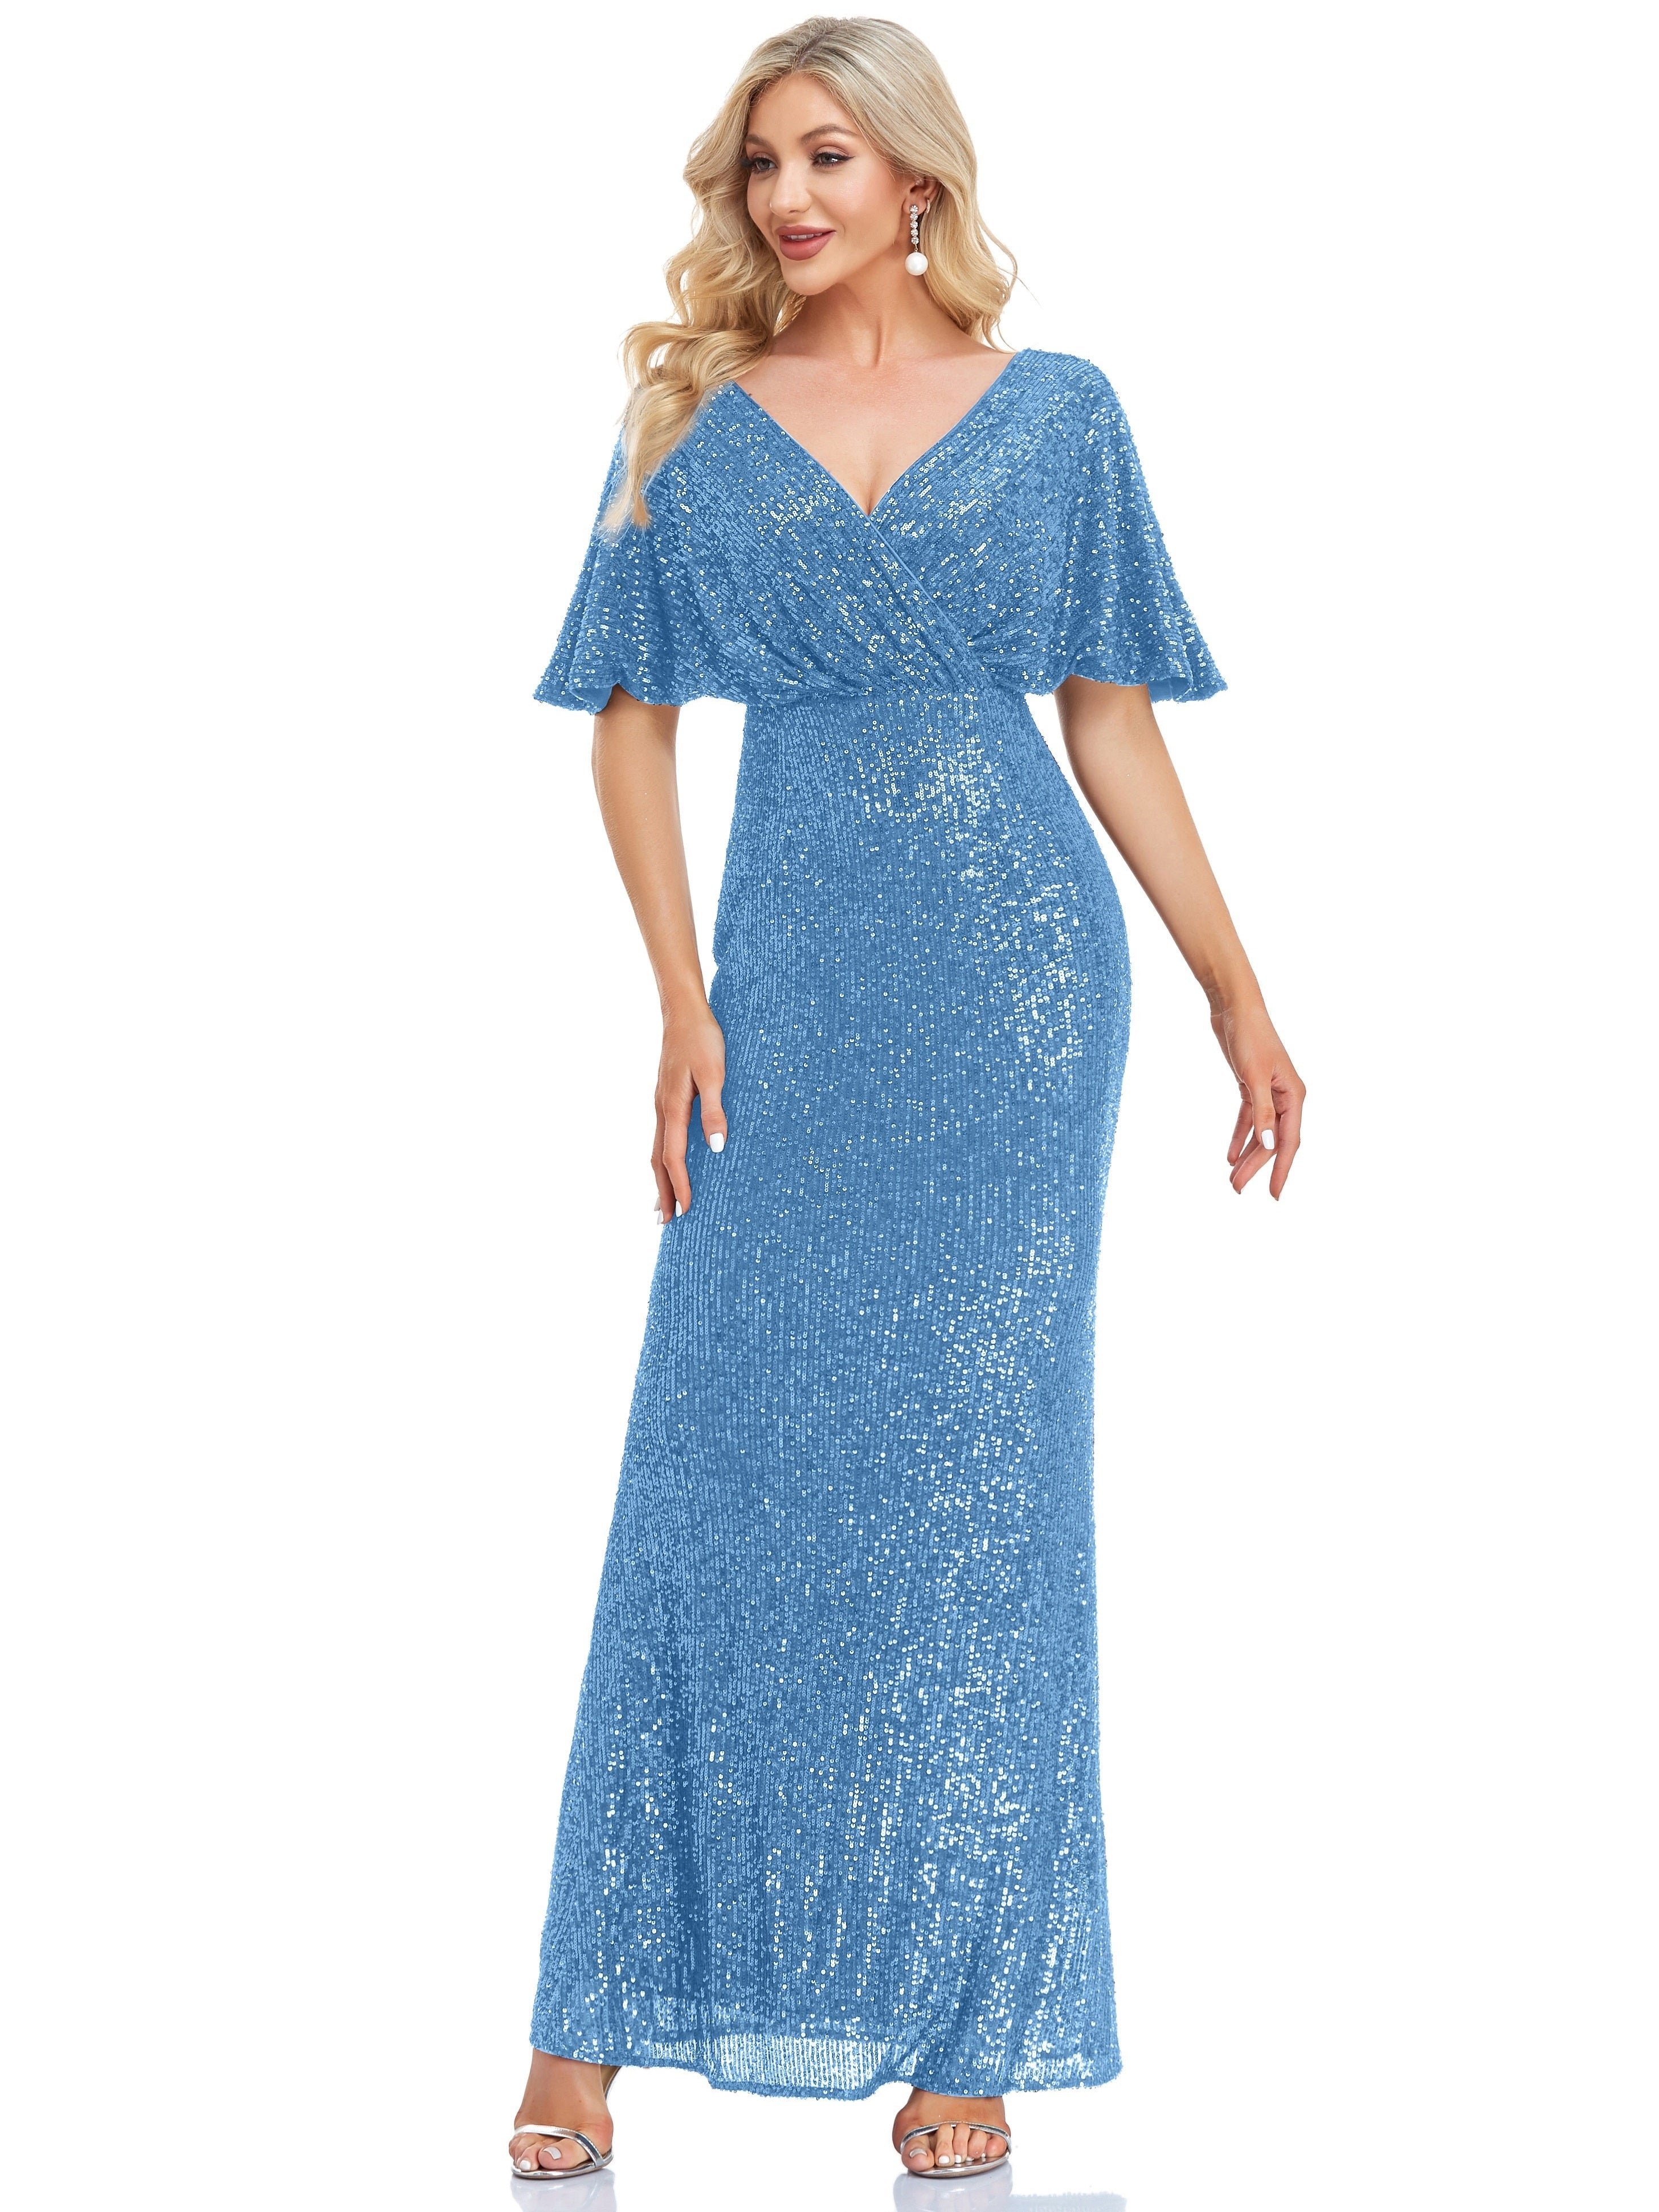 Solid Sequin Mother Of The Bride Dresses, Elegant Surplice Neck Short Sleeve Maxi Dress For Wedding Party | XUIBOL